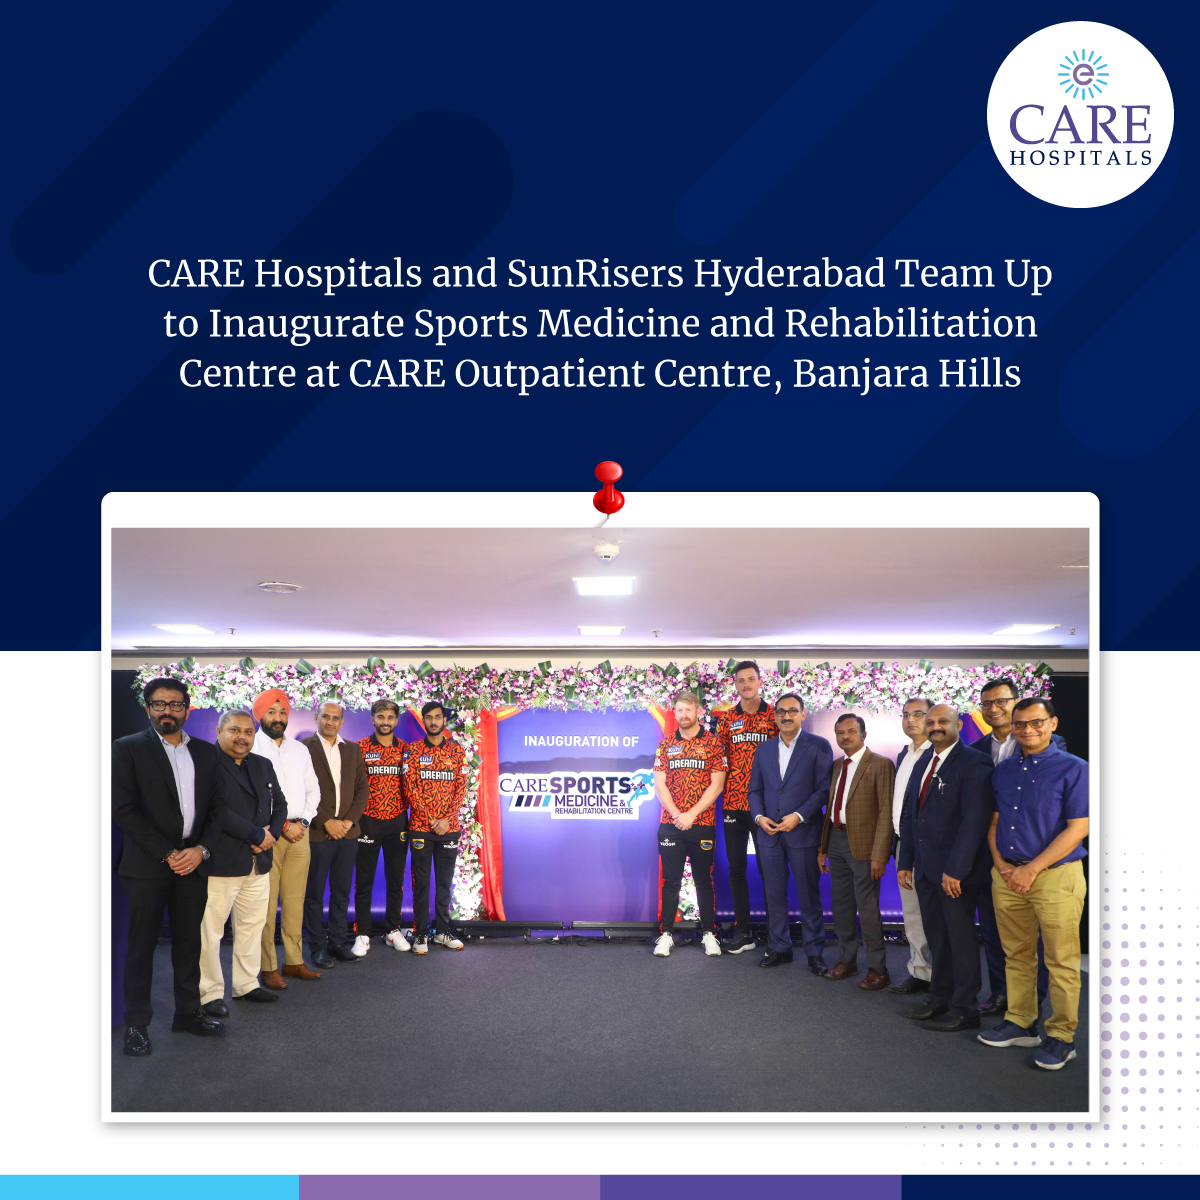 CARE Hospitals, India’s leading multi-specialty hospital chain, achieved a significant milestone as it inaugurated its cutting-edge Sports Medicine and Rehabilitation Centre at its Banjara Hills Unit. 
#CAREHospitals #TransformingHealthcare #SportsMedicine #Rehabilitation